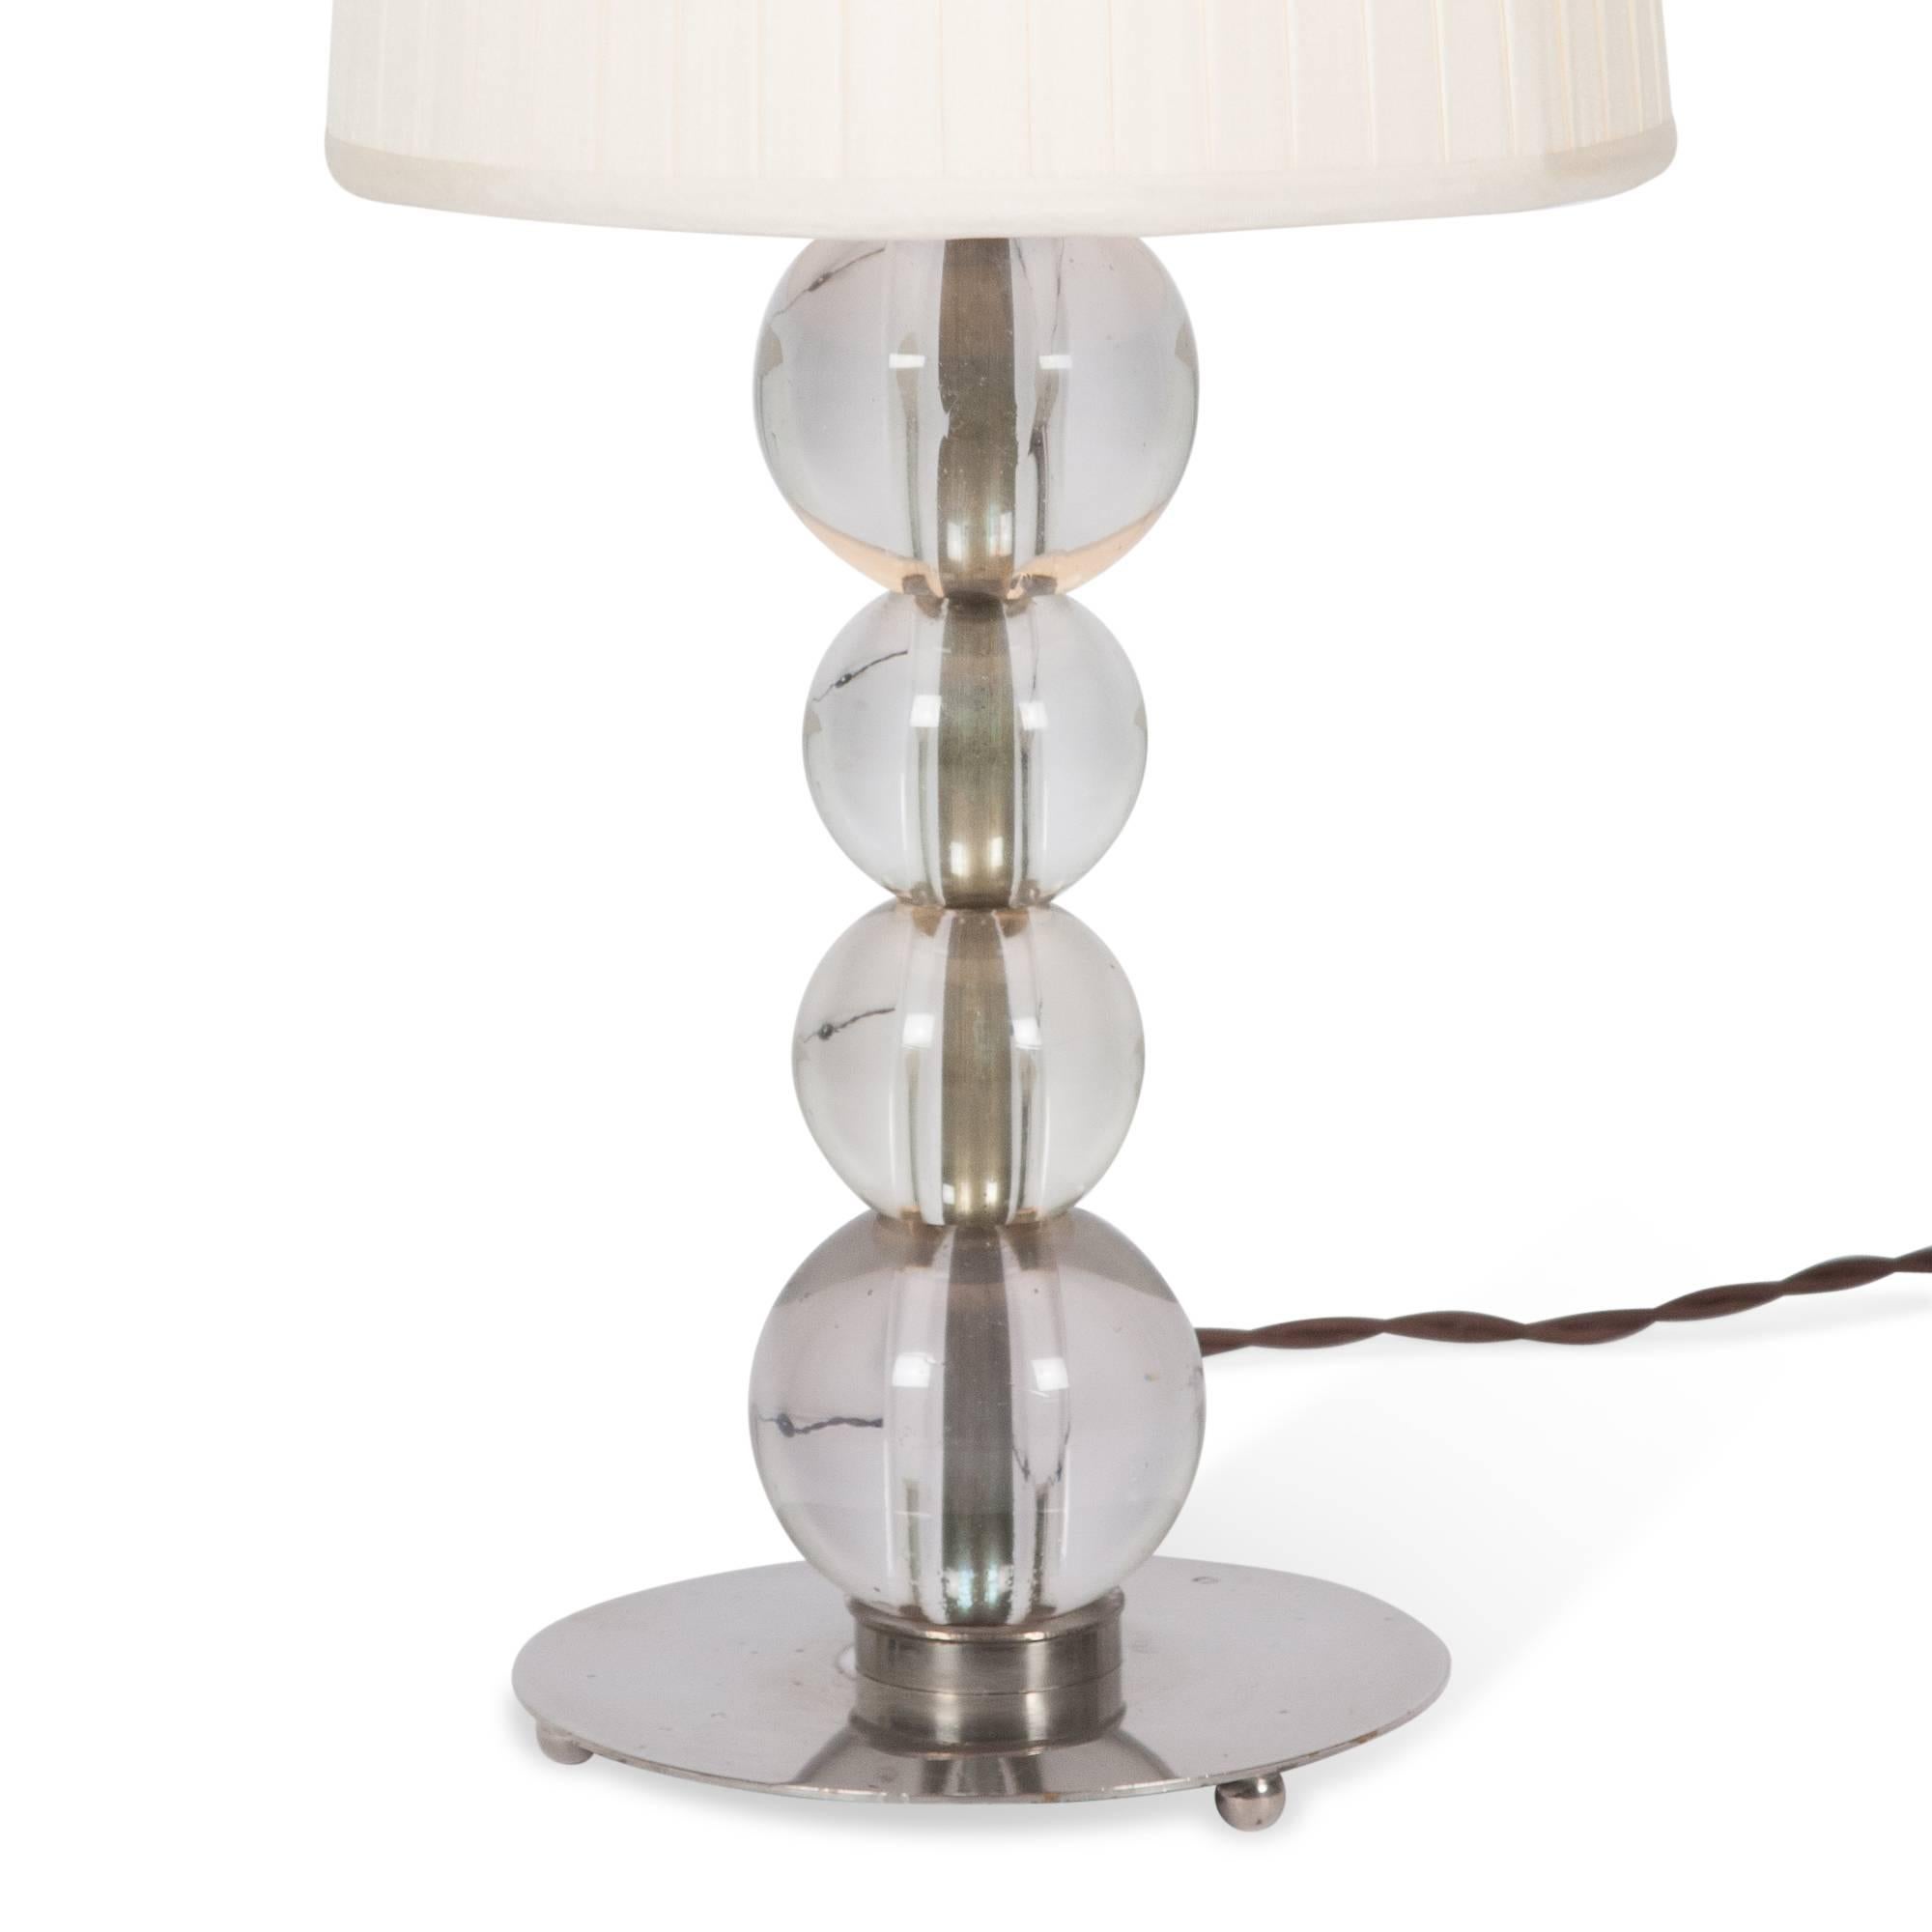 Jacques Adnet Attrib. Stacked Glass Ball Table Lamp, French, 1930s In Excellent Condition For Sale In Hoboken, NJ